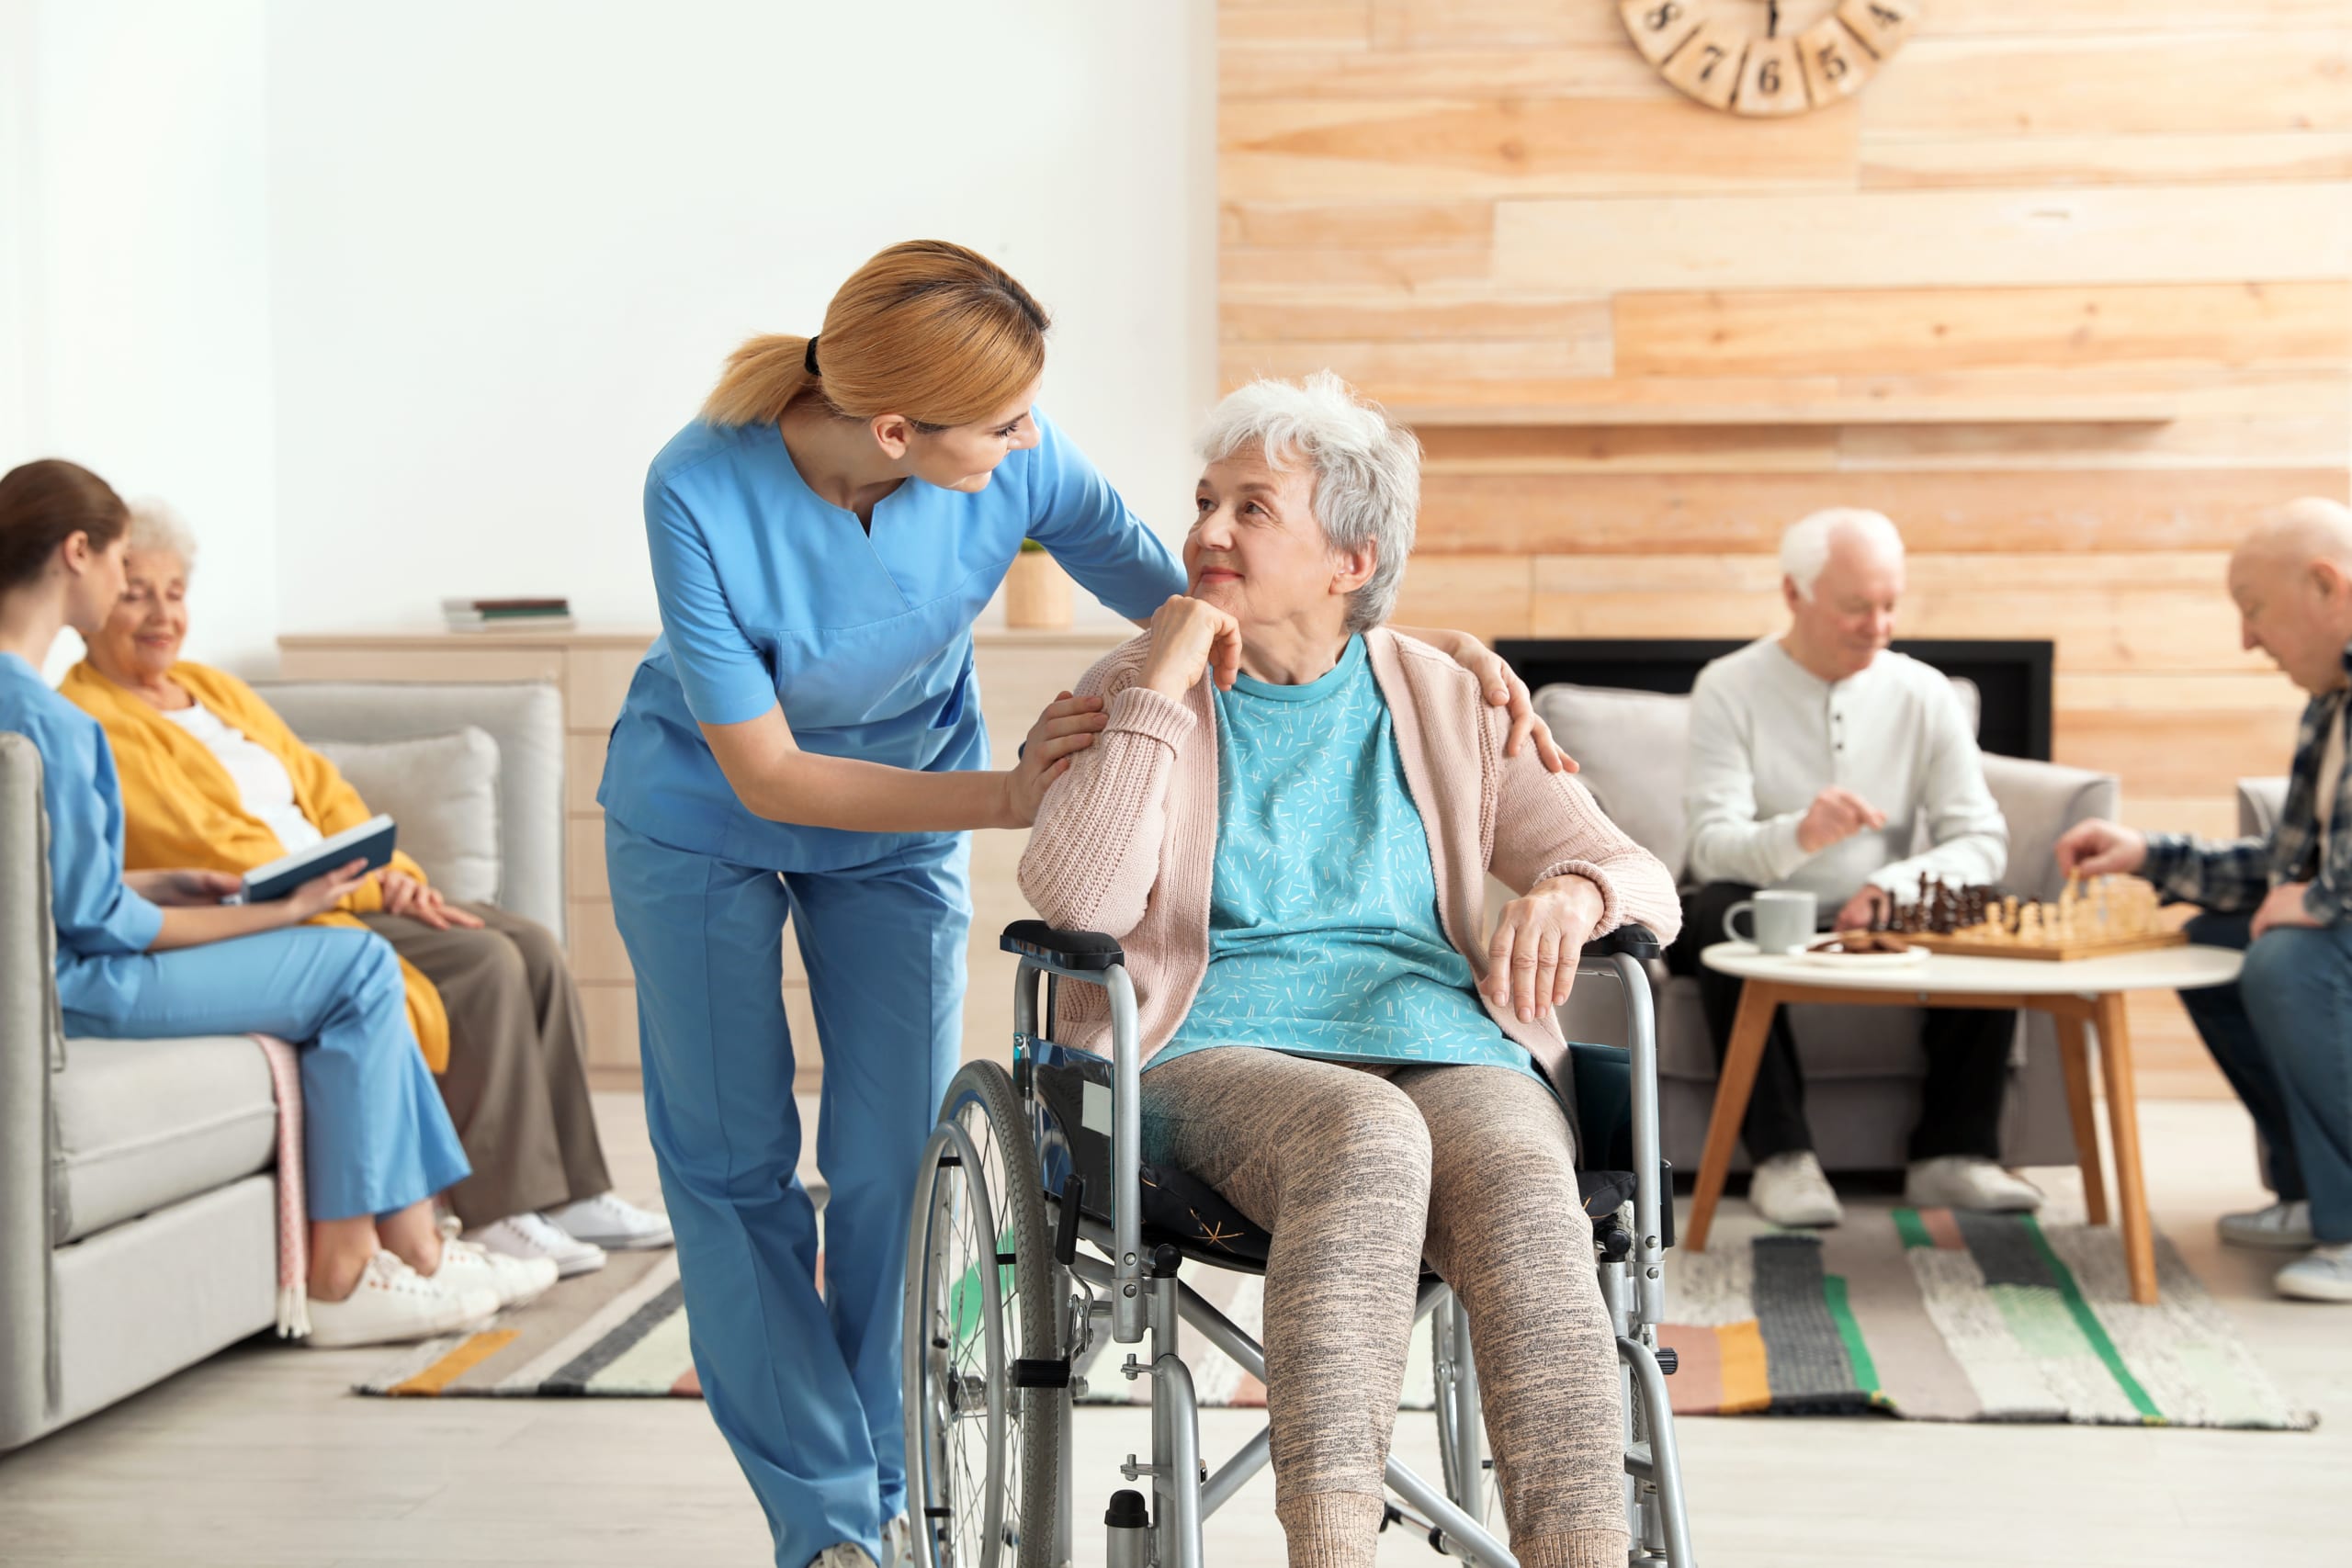 A woman in scrubs interacting with a nursing home patient